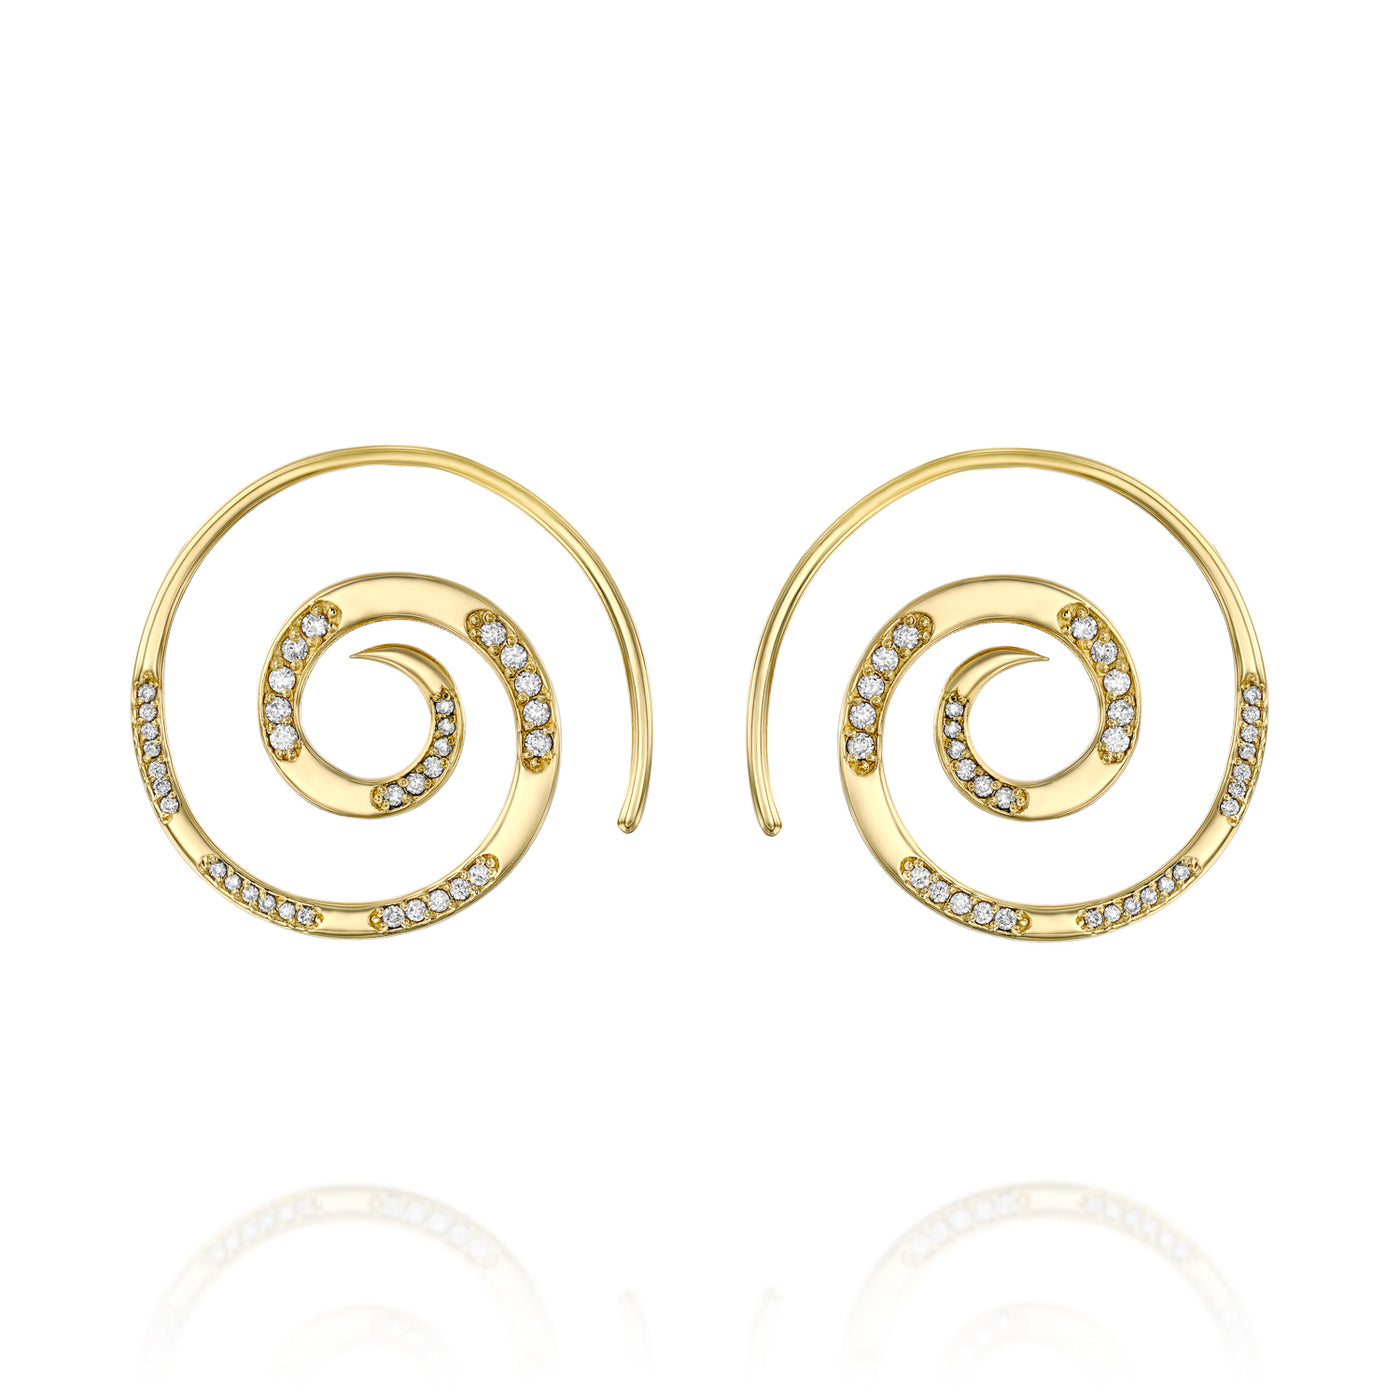 Our 14K gold and diamonds spiral earrings feature a stunning boho swirl tribal design, the perfect unique hoop earrings.